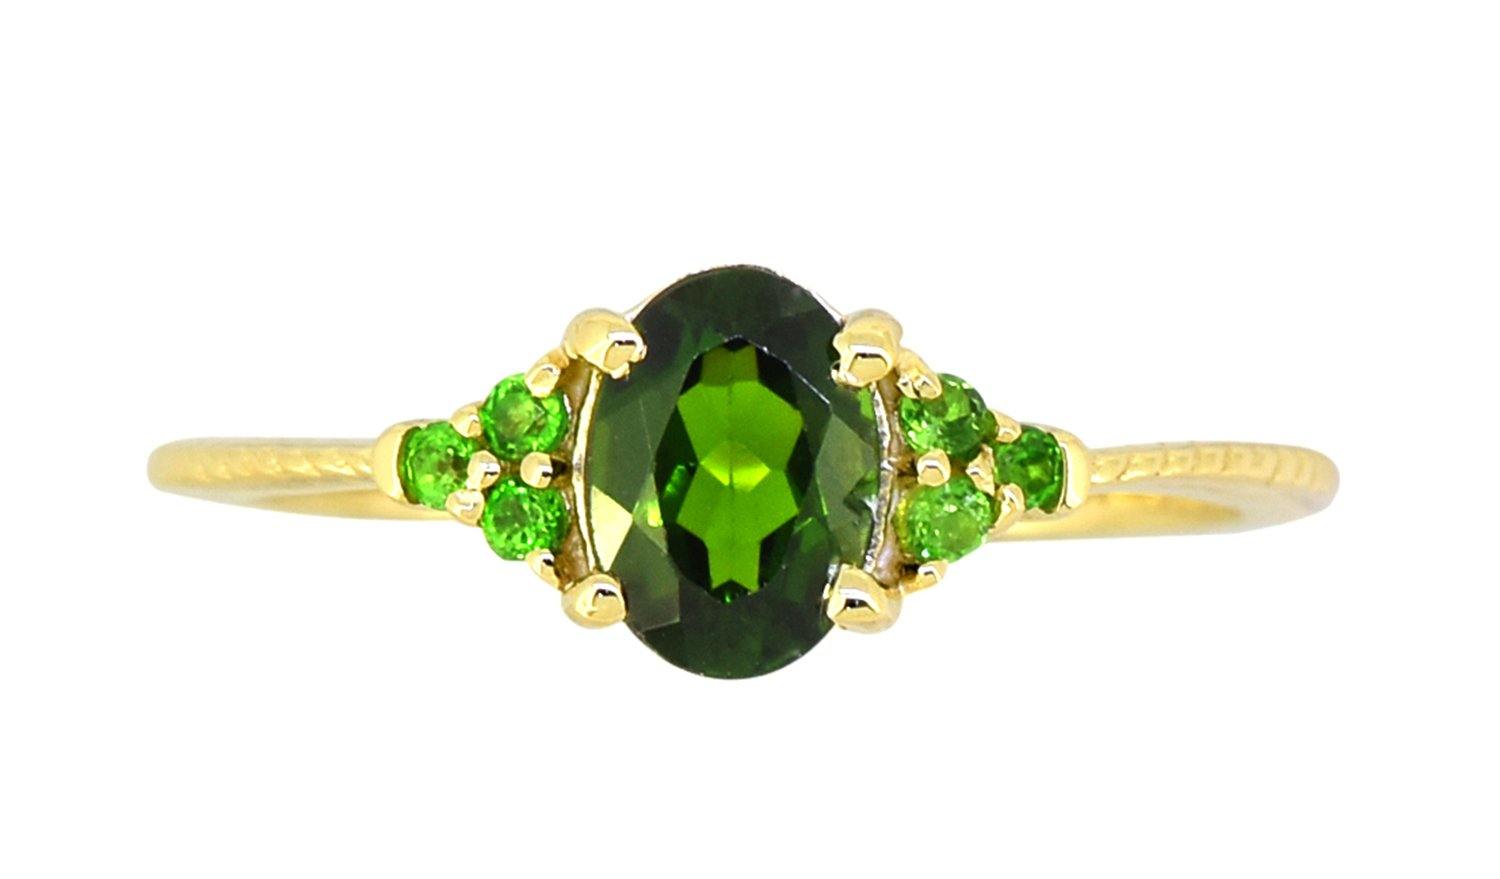 Chrome Diopside Solid 925 Sterling Silver Gold Plated Promise Ring Genuine Gemstone Jewelry - YoTreasure